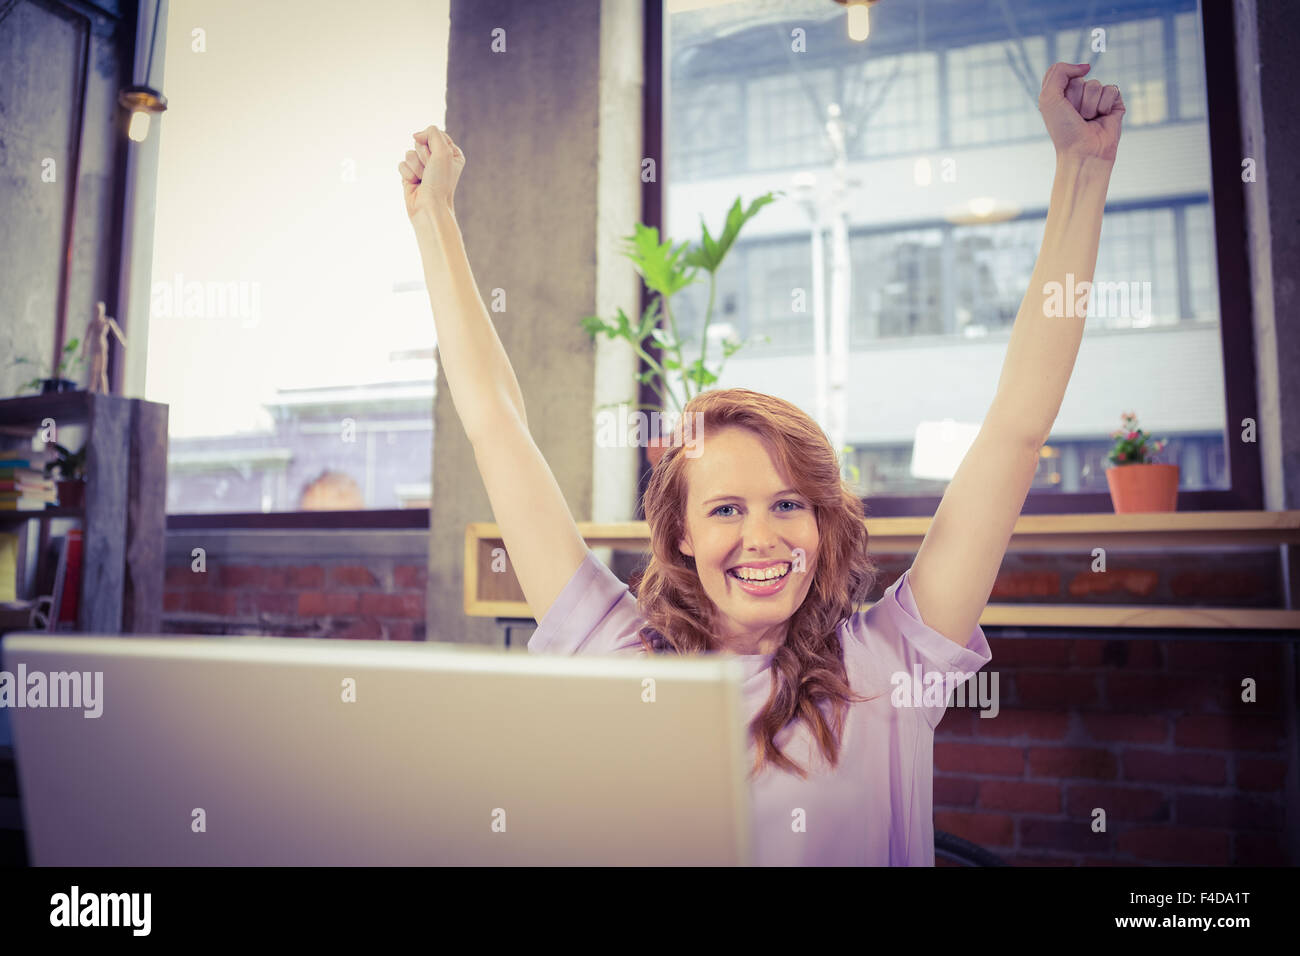 Portrait of happy woman with hands raised Stock Photo